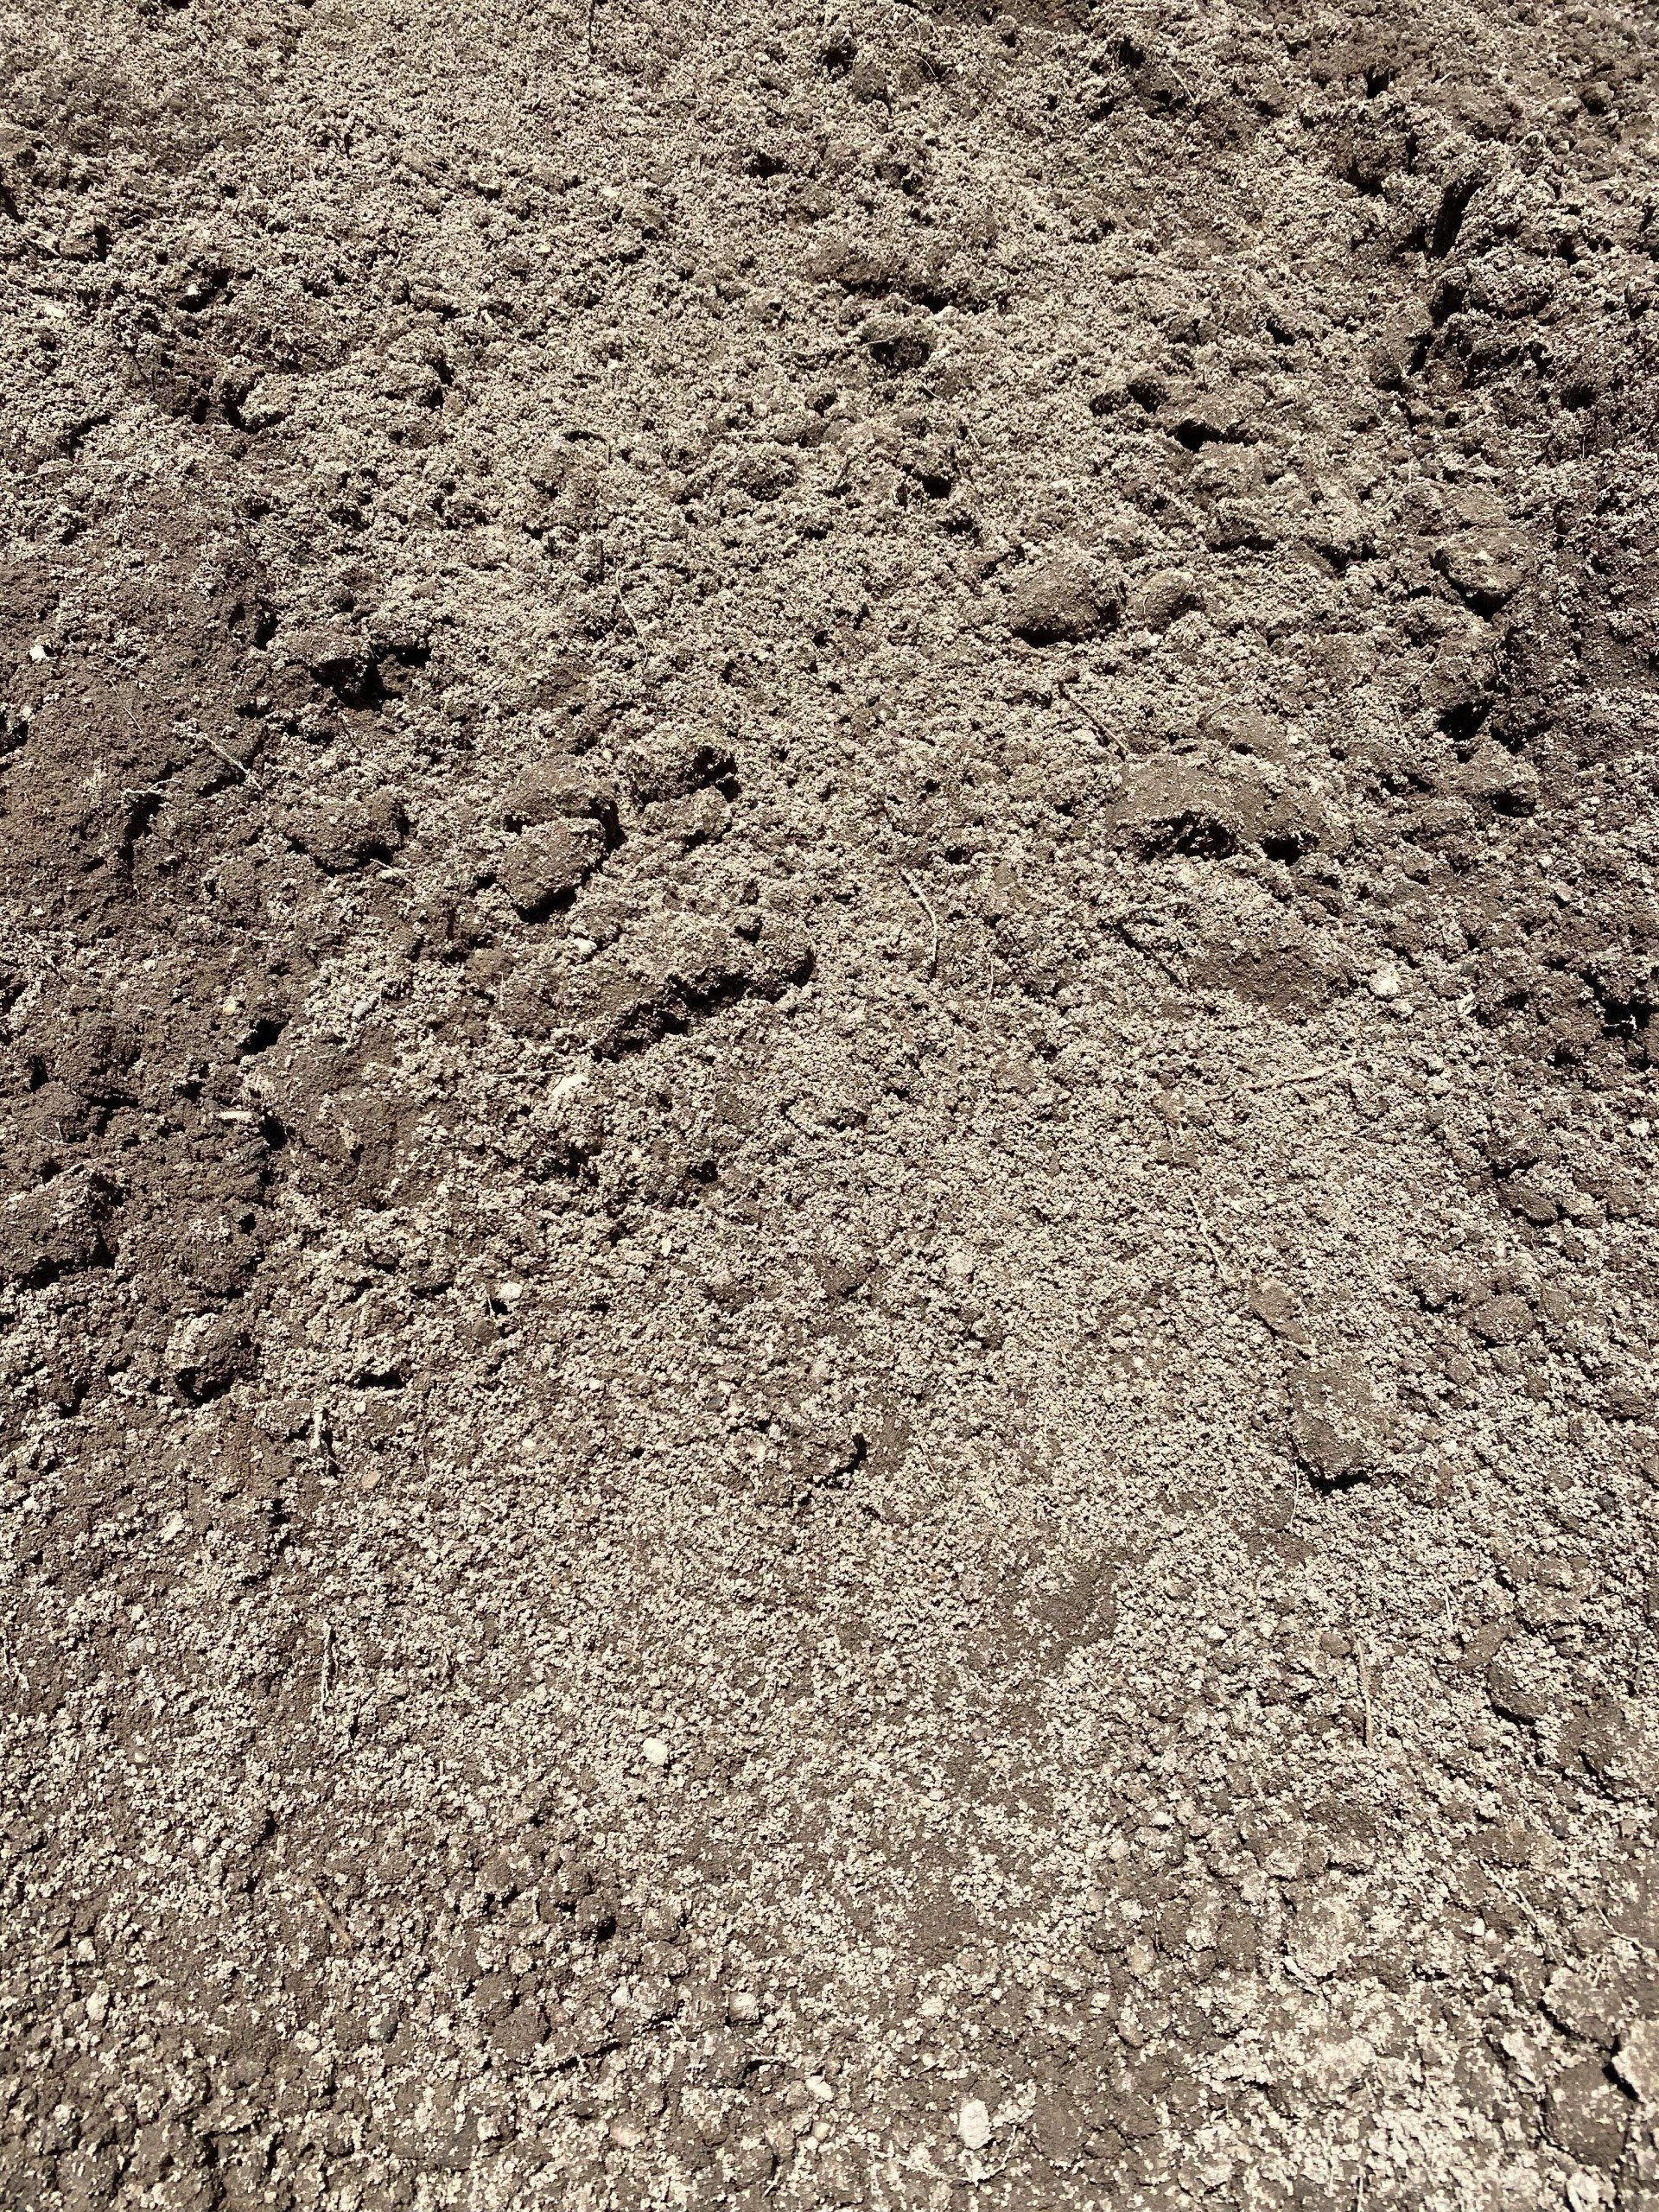 A close up of a pile of gravel on the ground.